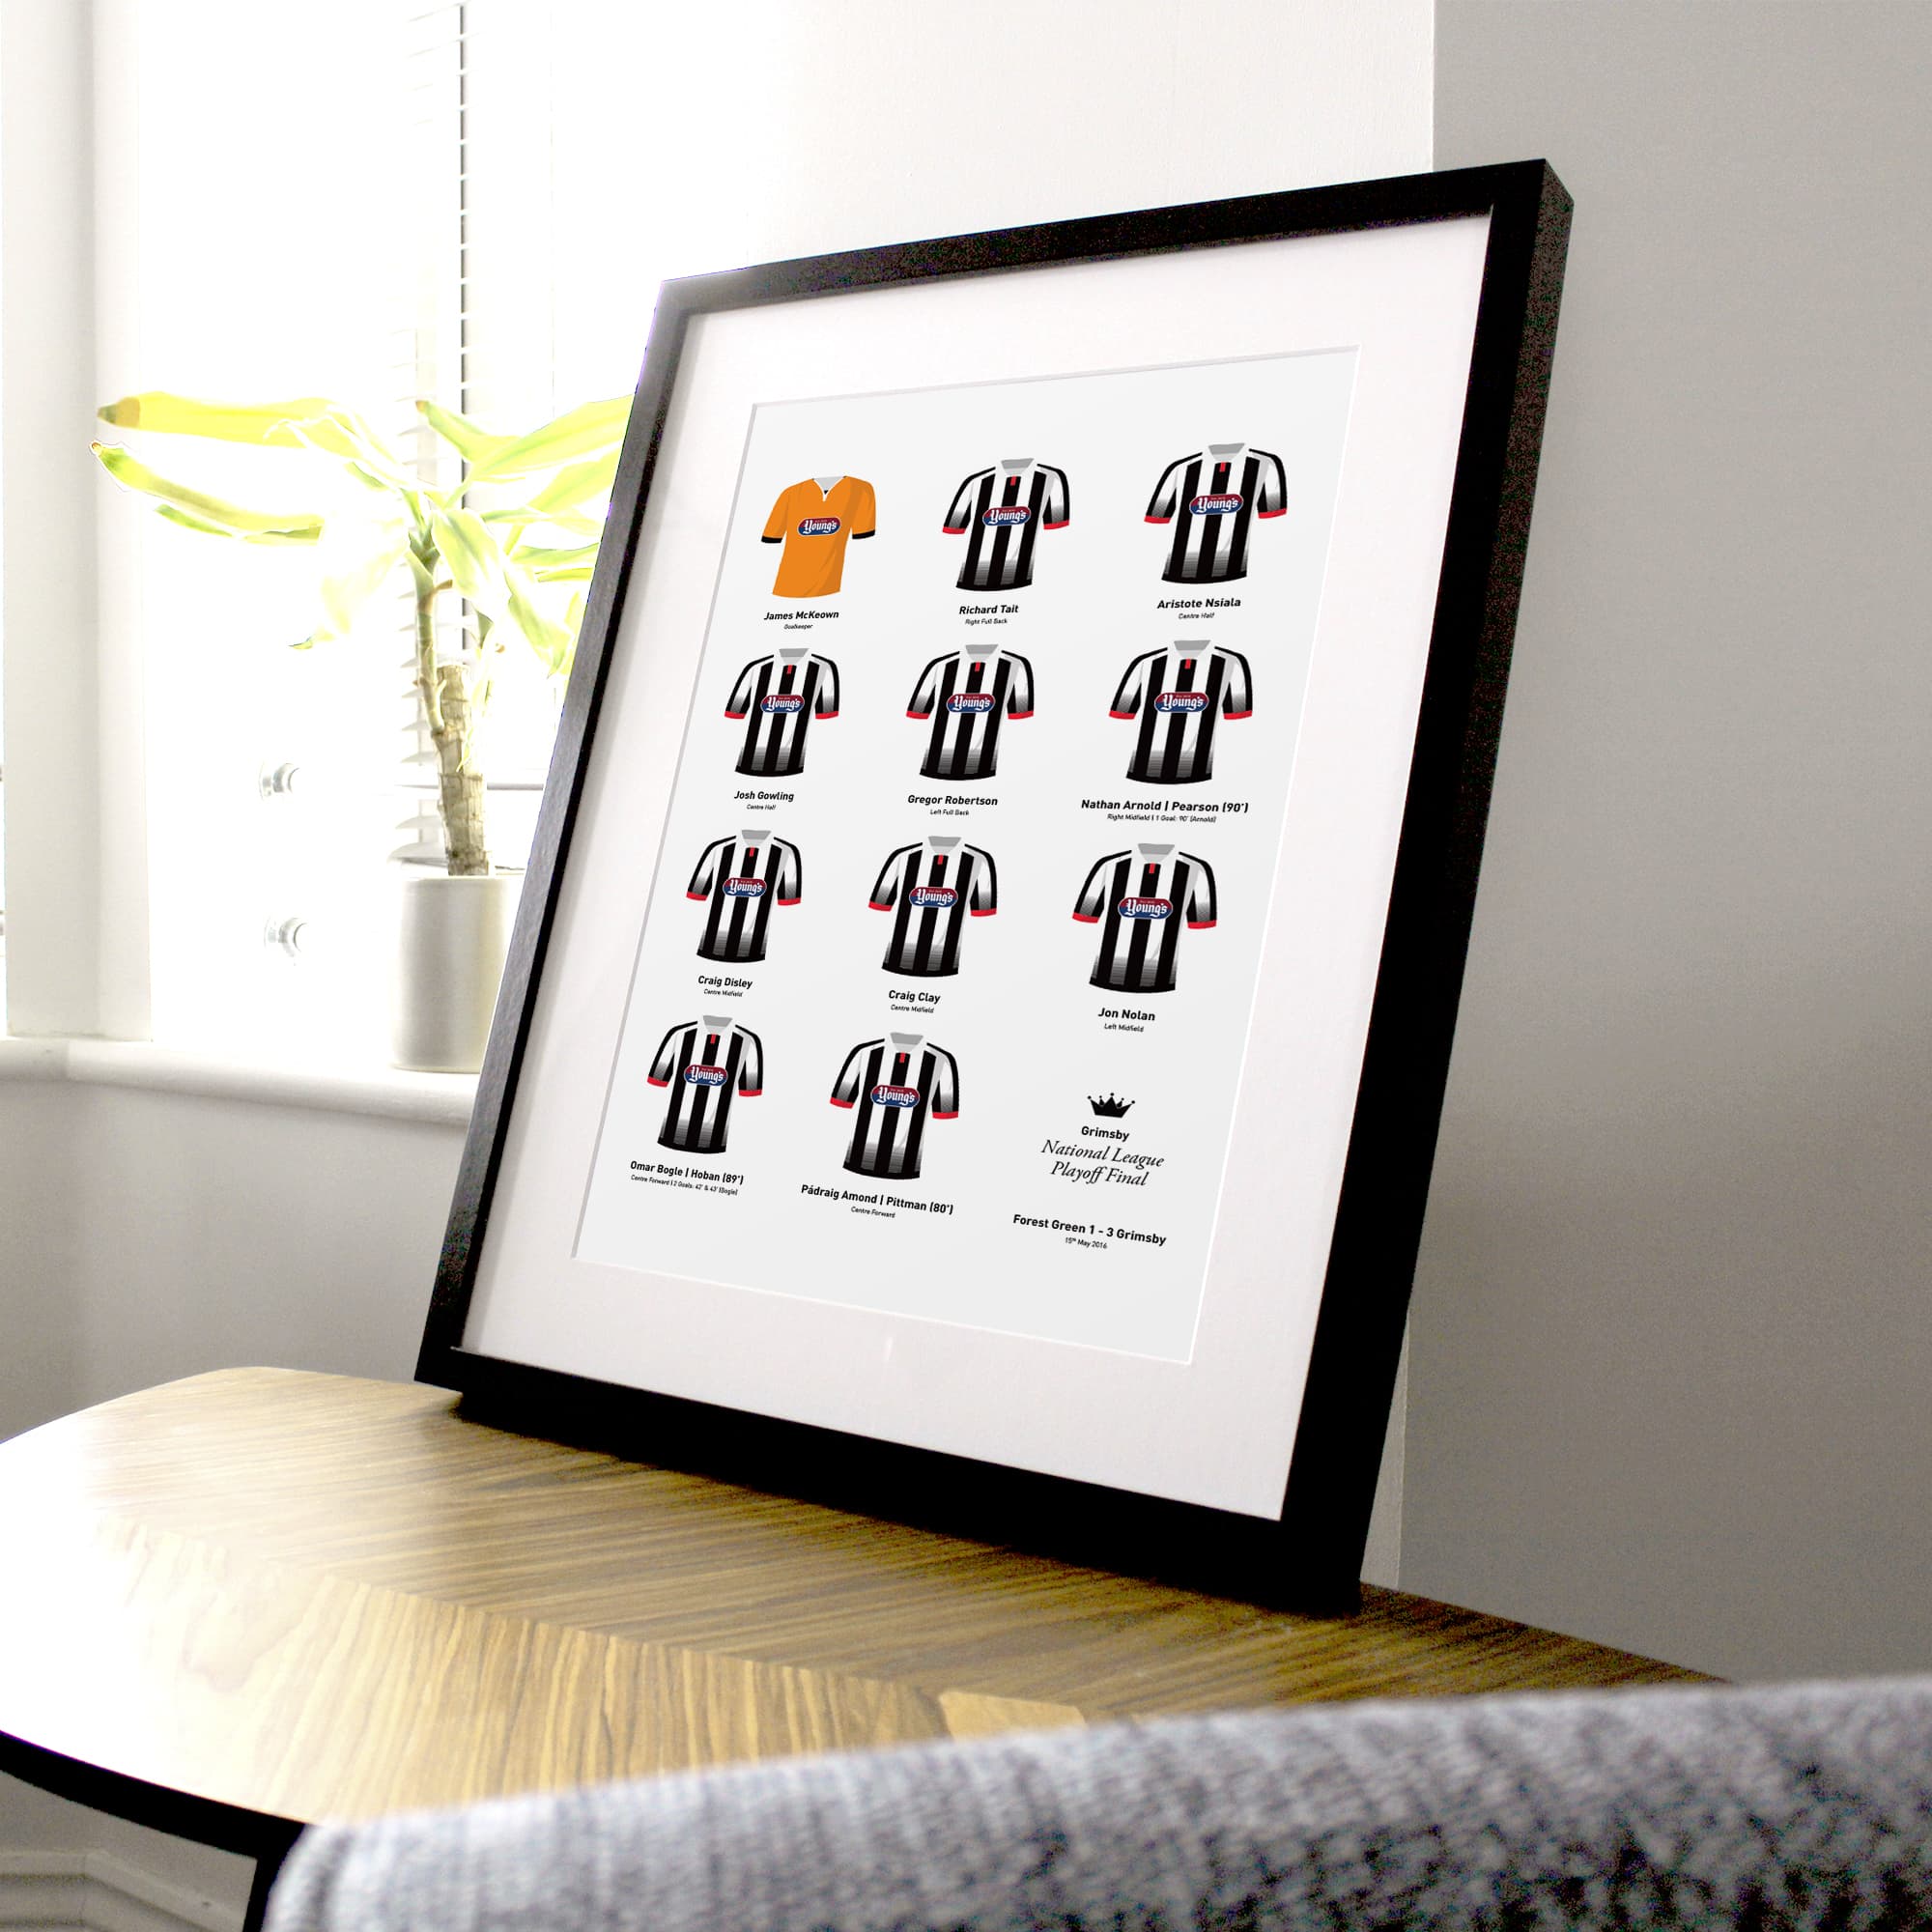 Grimsby 2016 Conference Playoff Winners Football Team Print Good Team On Paper